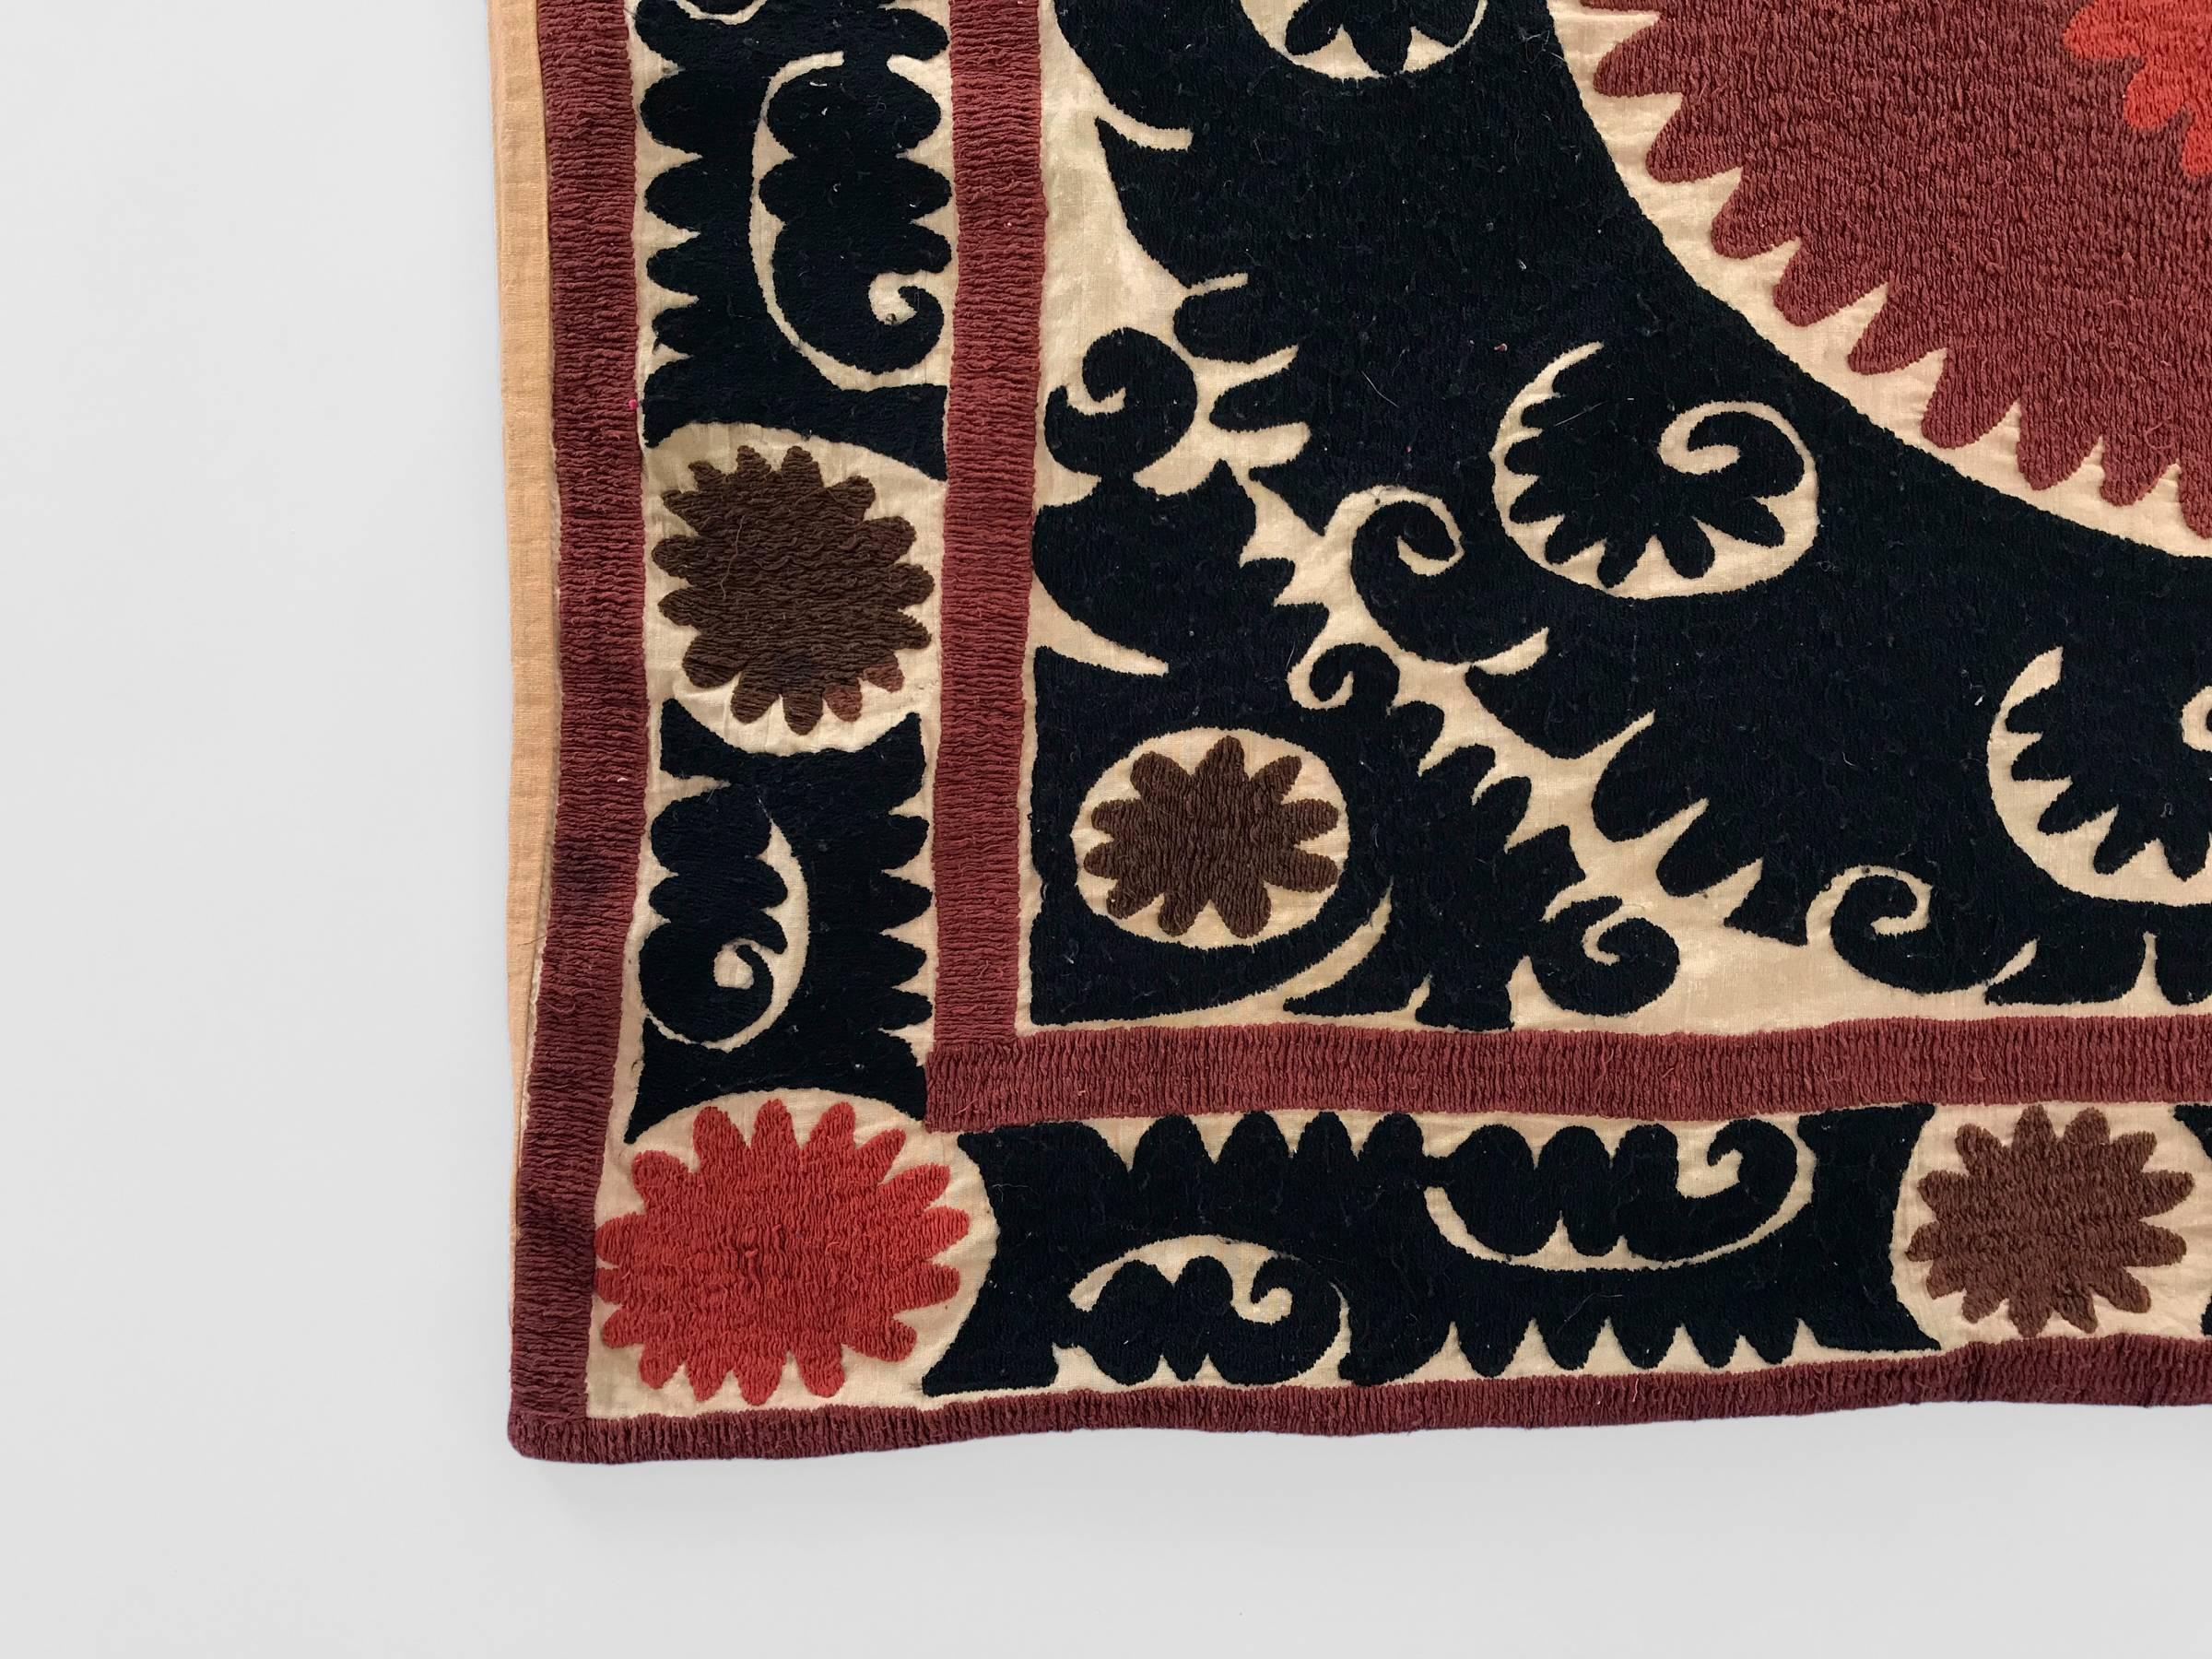 Oversized vintage embroidered Suzani pillow with traditional patterning in shades of black, red and maroon over a cream background.

Measures: 51 x 43 in.

Perfect for use as a floor, dog or pet pillow.

Pillow is not sold with insert. Custom